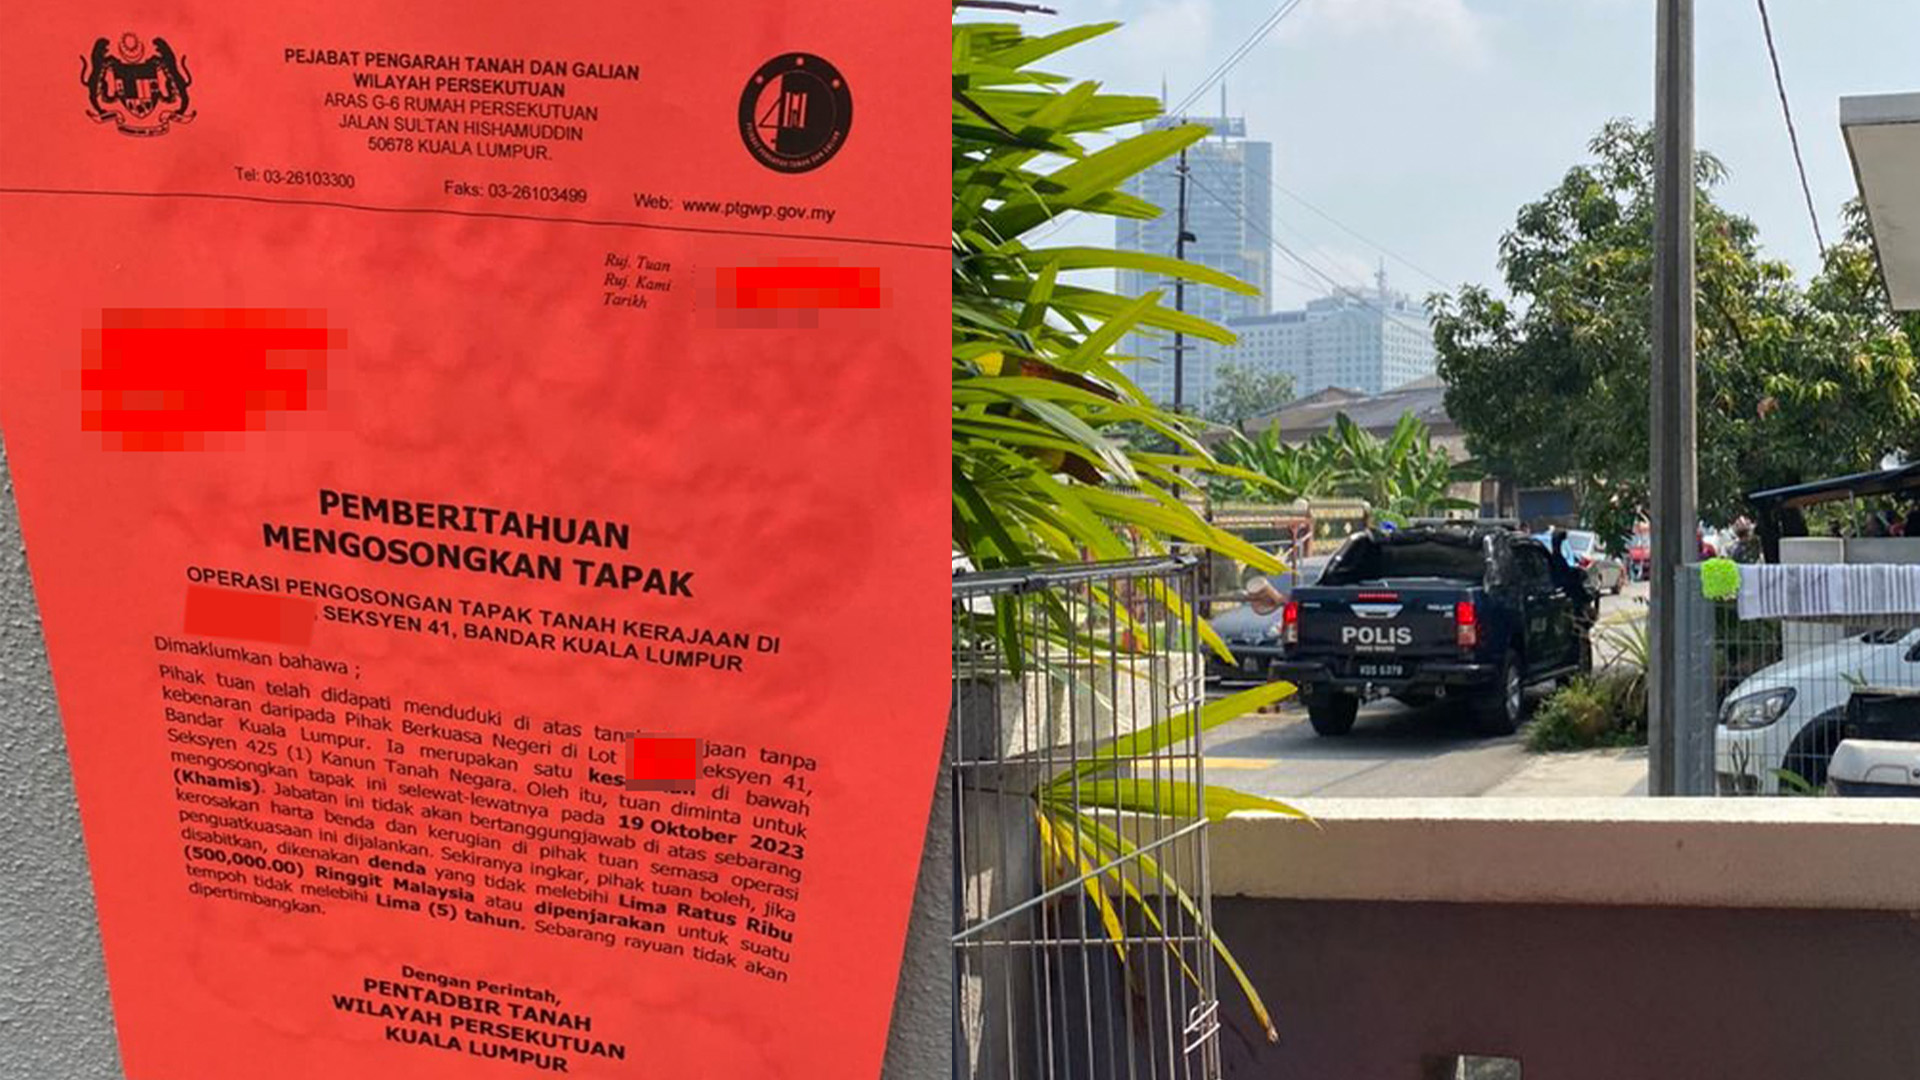 Get out by Oct 19: Kg Sg Baru landowners shocked by latest eviction notice